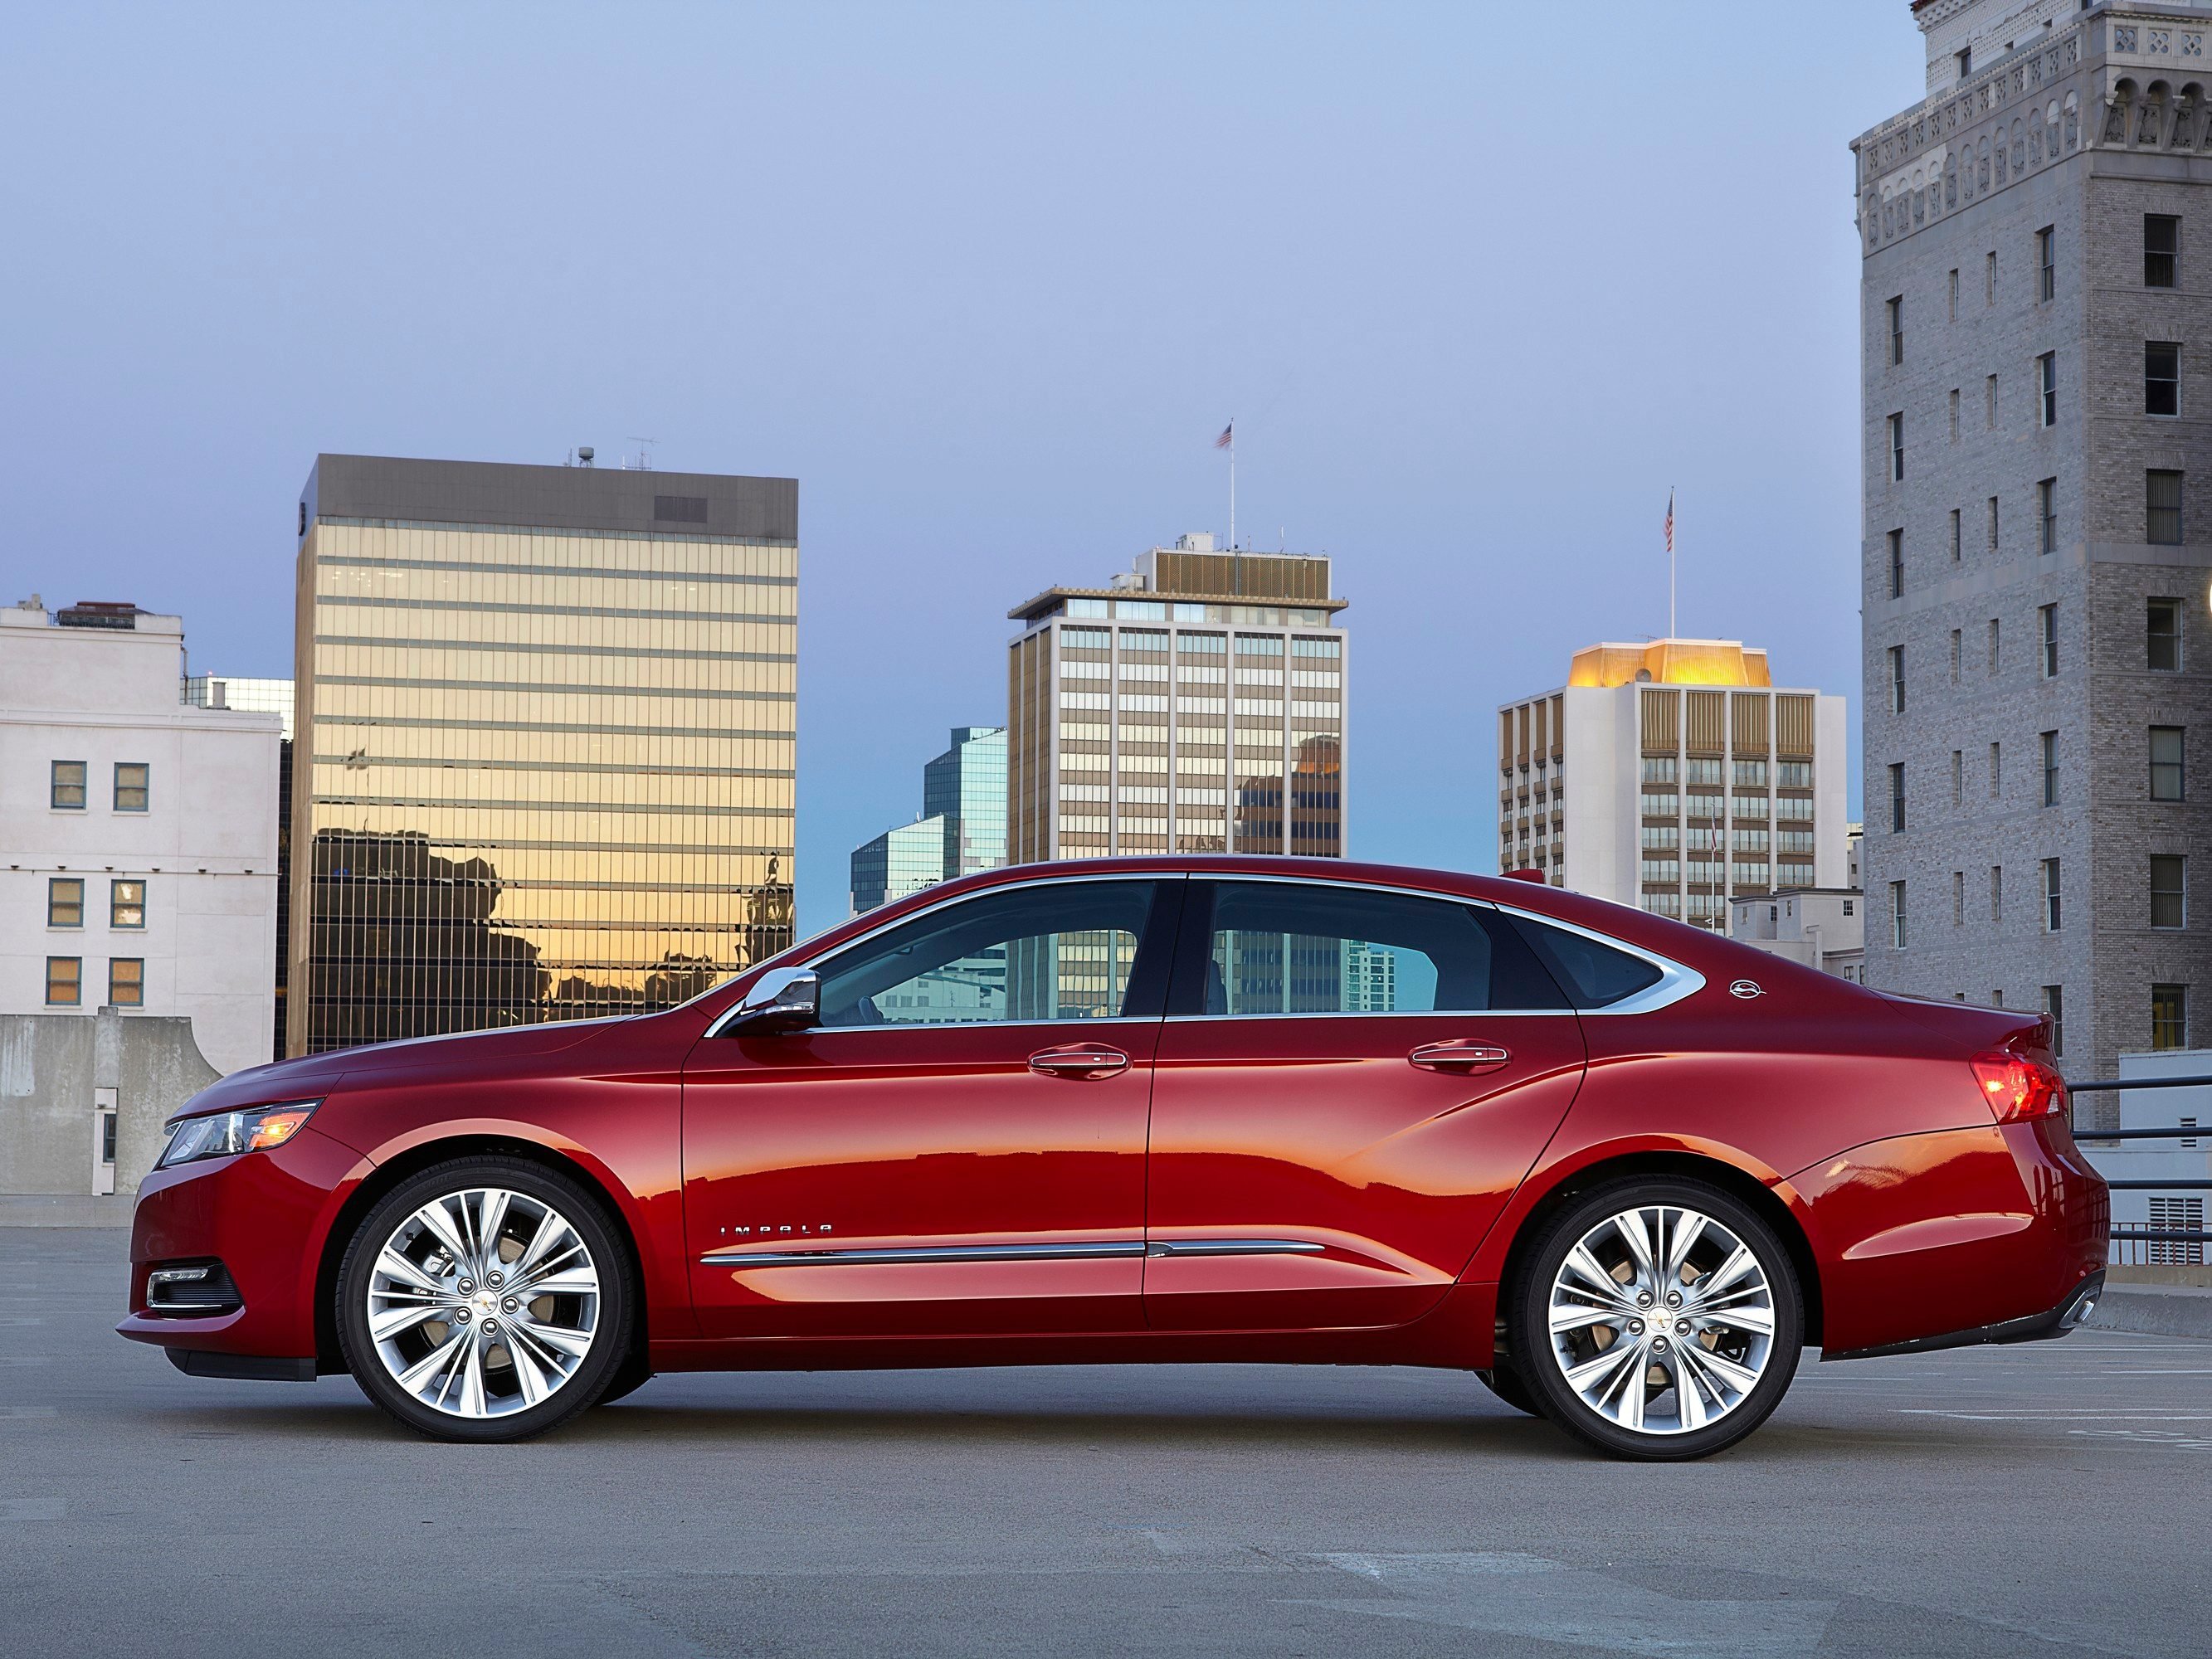 5. The 2016 Chevrolet Impala boasts new safety features.